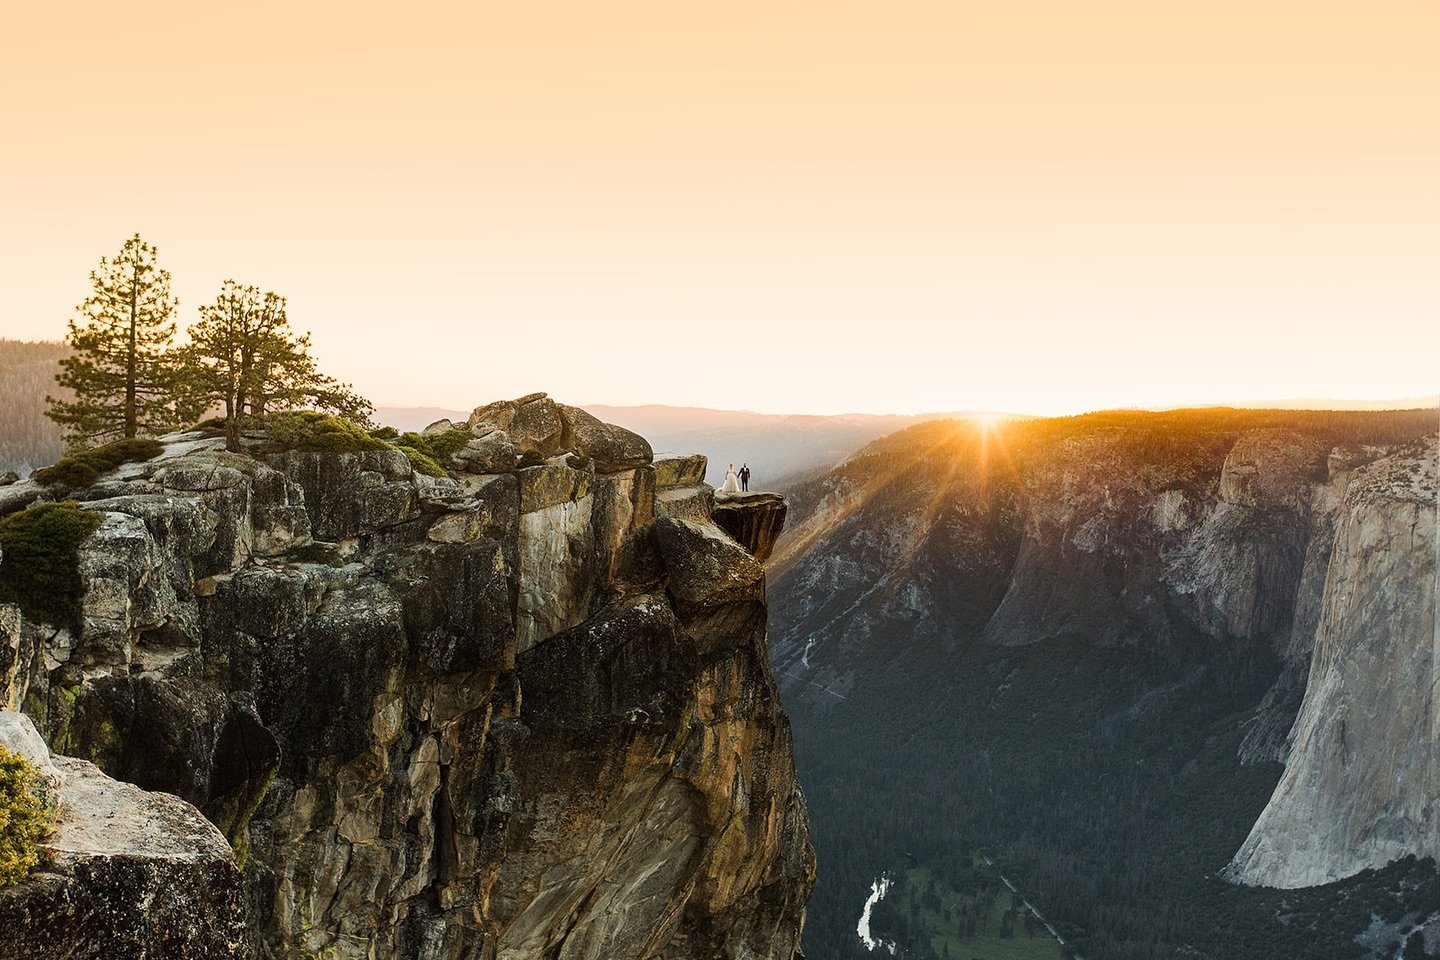 So, you&rsquo;ve been dreaming of eloping at Yosemite National Park? It can be overwhelming once you finally pick that perfect elopement destination (if you need help choosing a spot in the Sierra Nevadas, check out our Best Elopement Destinations In